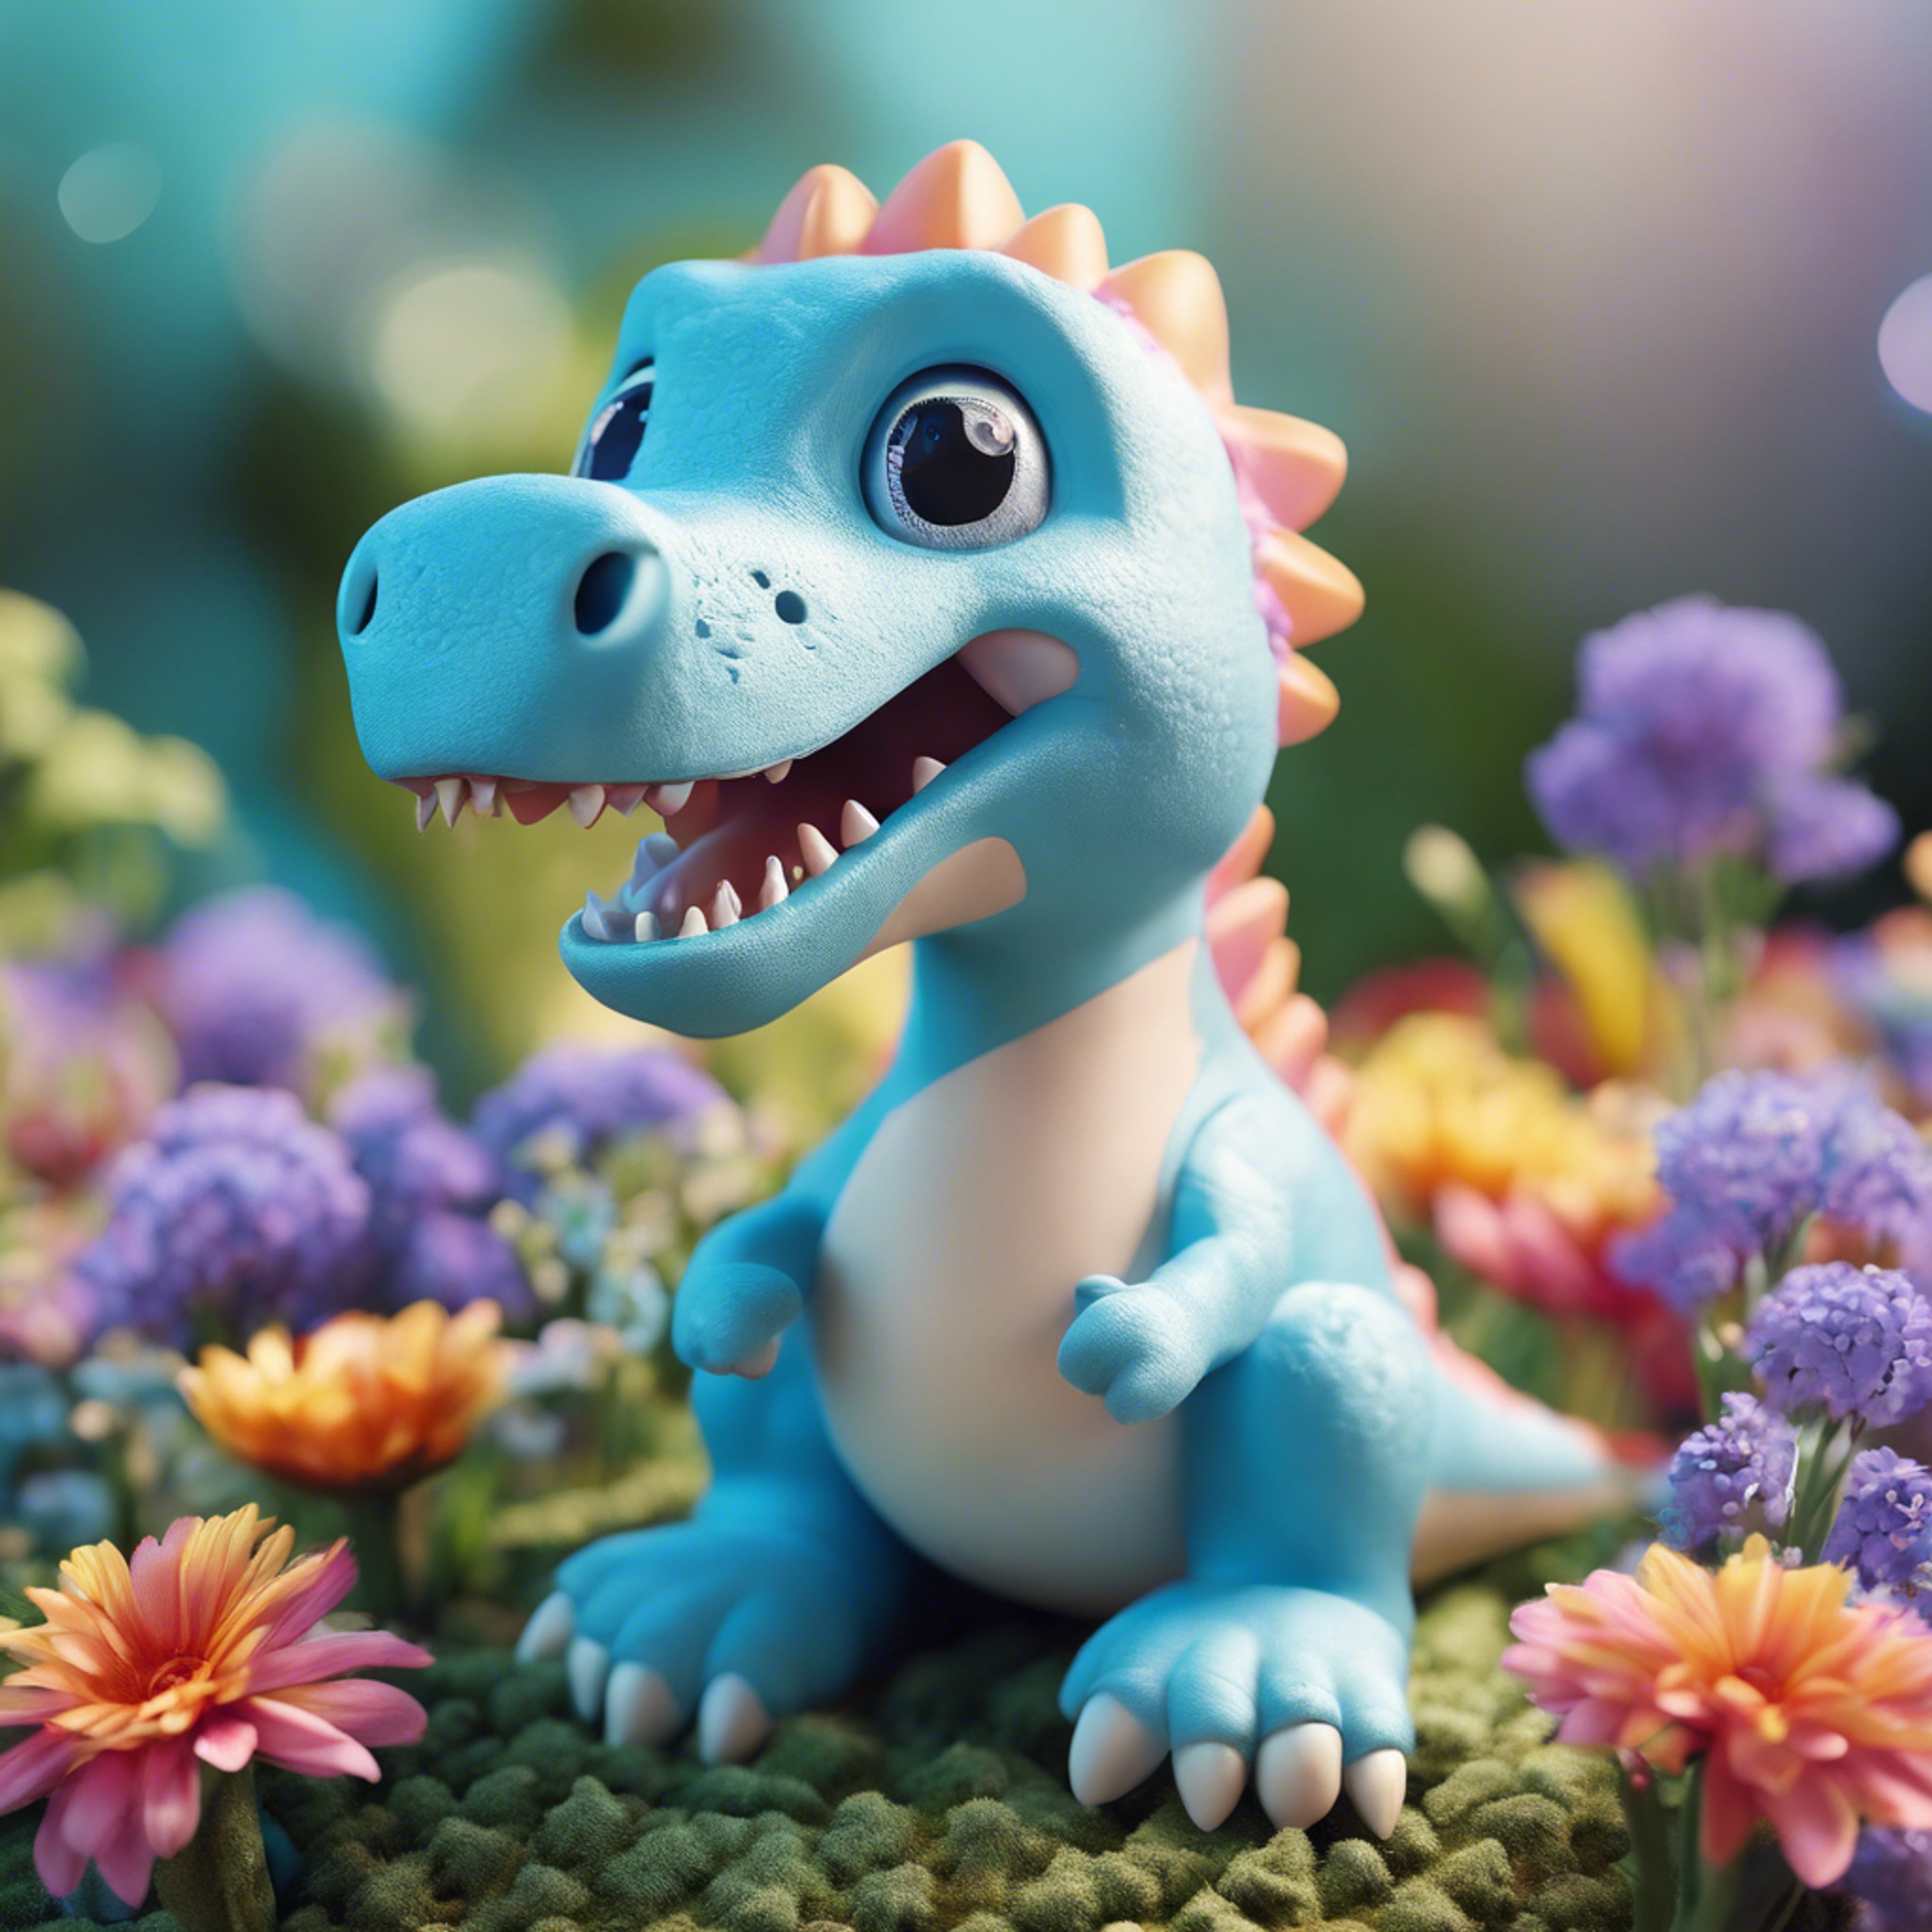 A cute light blue dinosaur with a kawaii expression, surrounded by brightly colored flowers.壁紙[445e6142c59b4fa2886e]